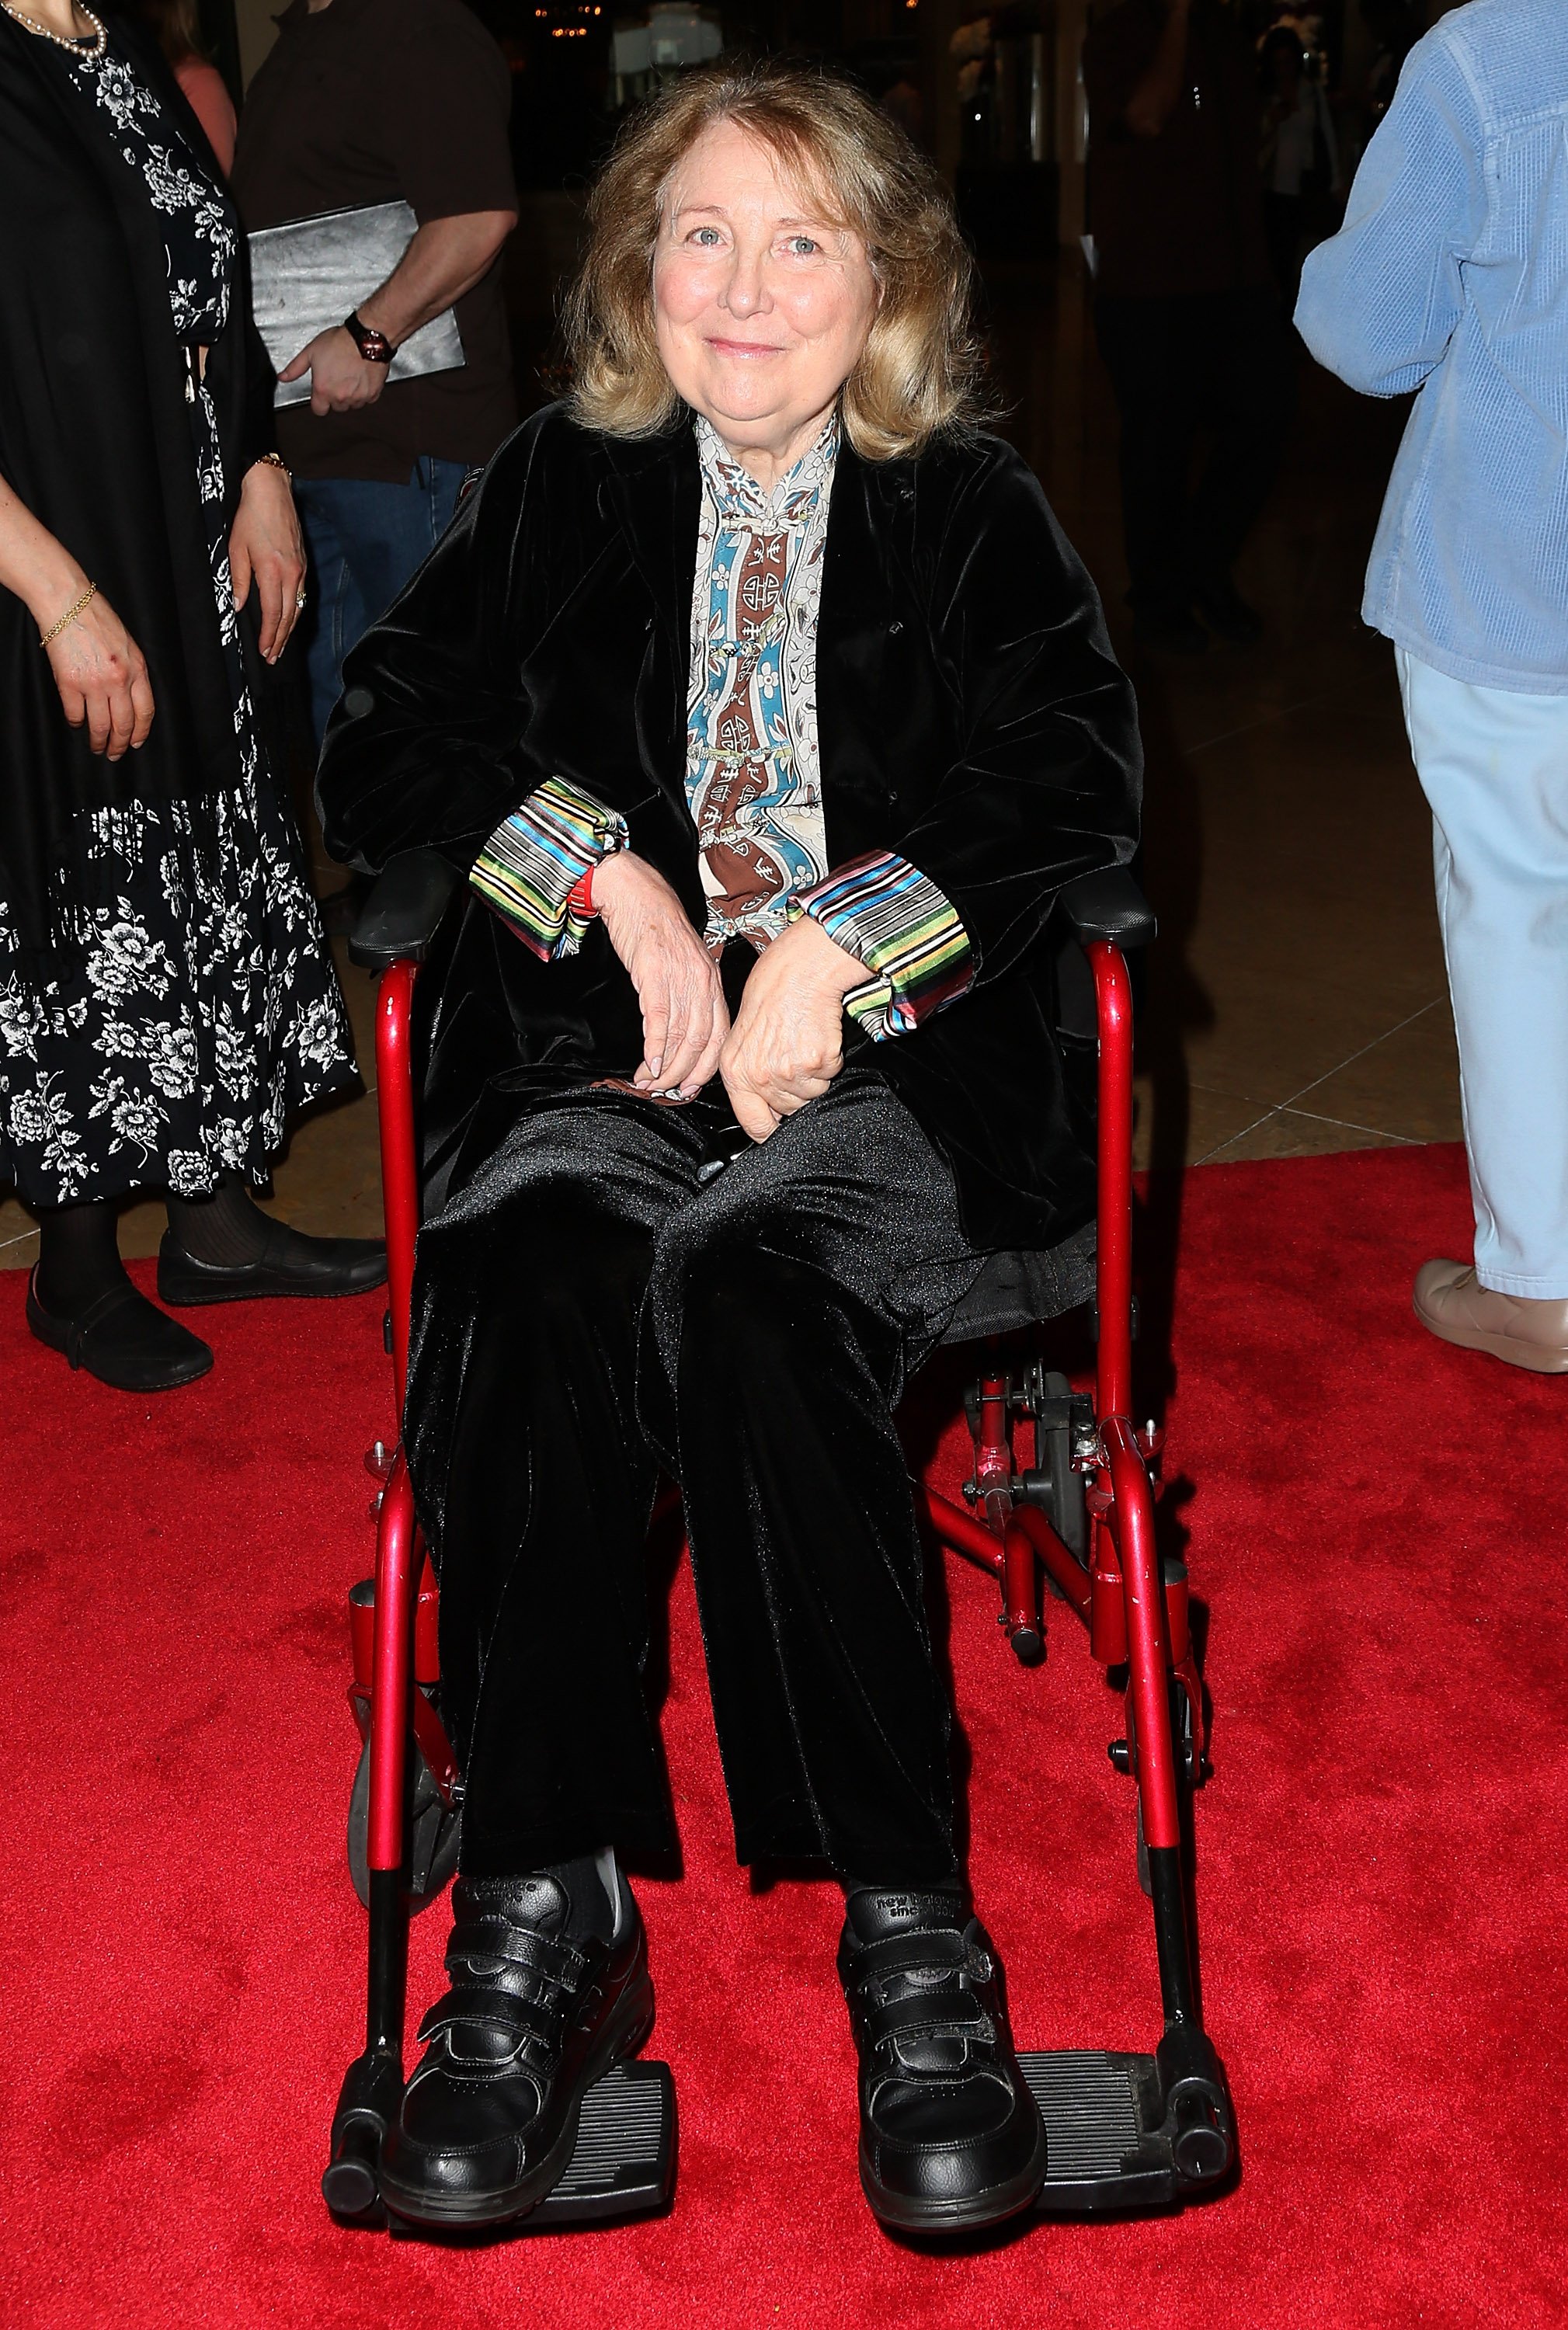 #39 Tootsie #39 s Teri Garr Uses Wheelchair Due to Multiple Sclerosis She